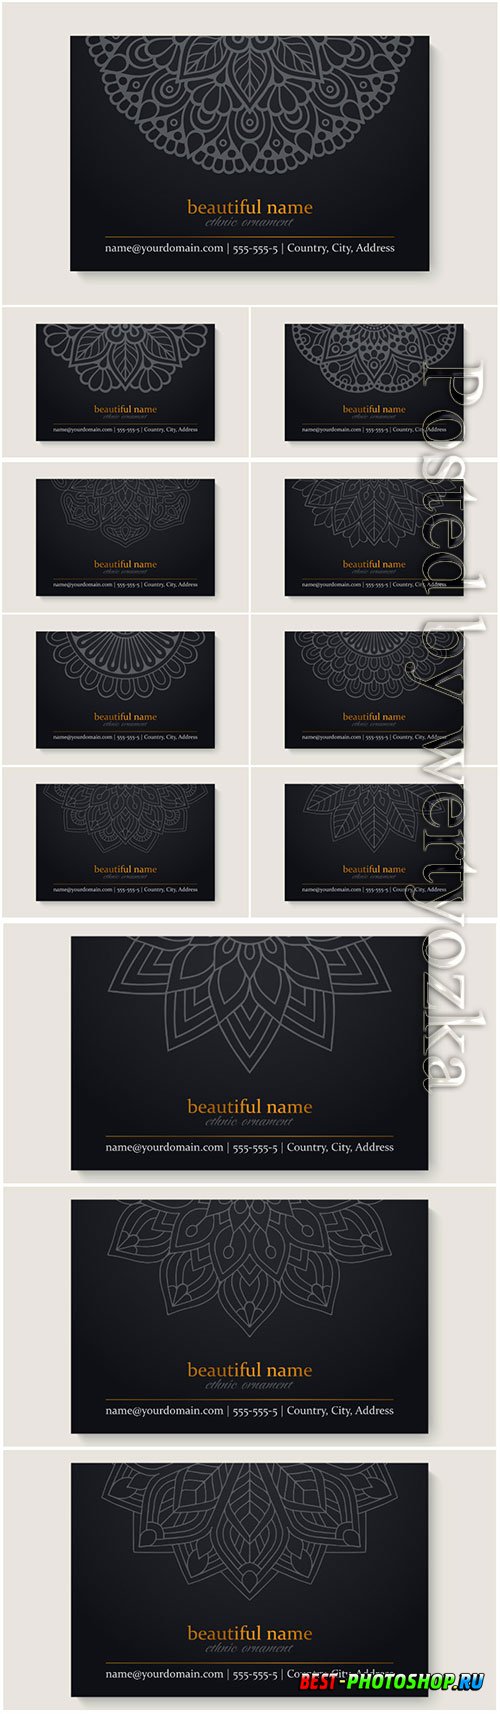 Business card template with ethnic mandala design